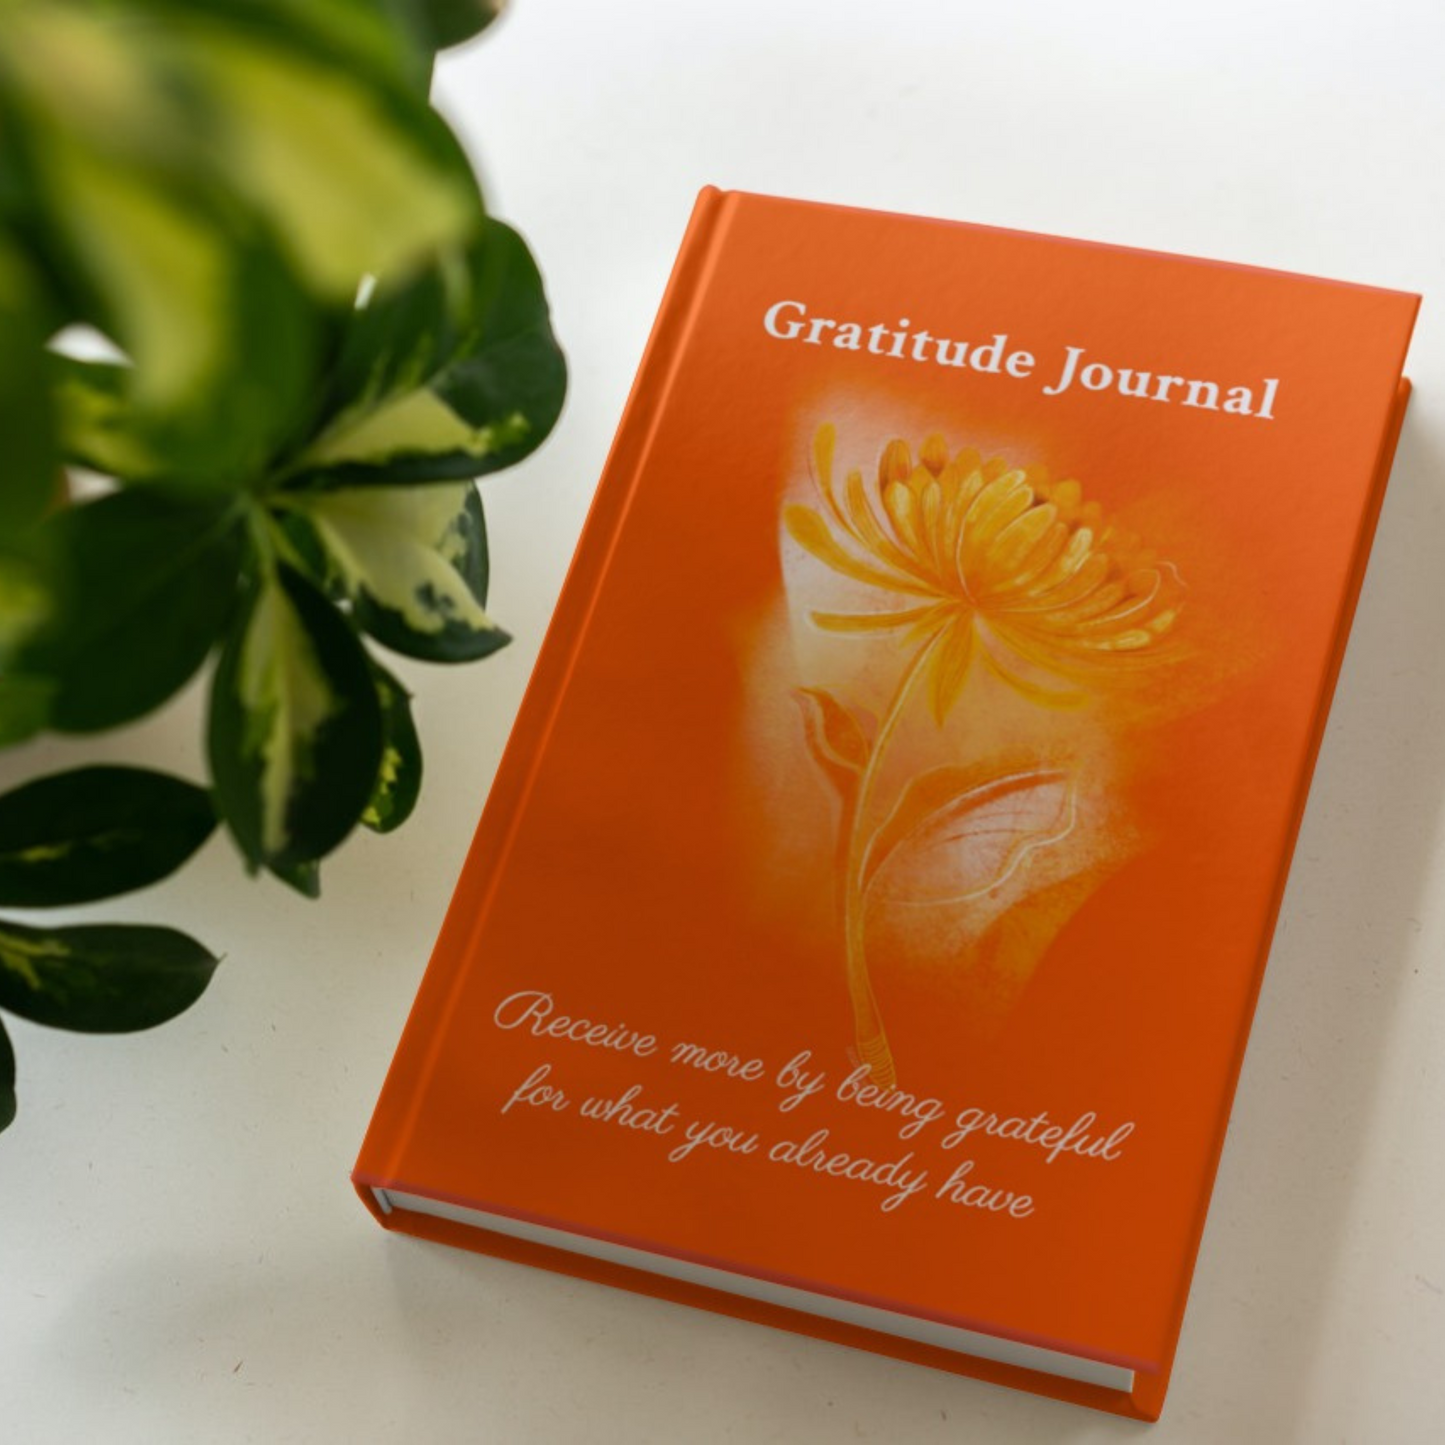 The hardcover version of the gratitude journal by Arisateam near a green plant.